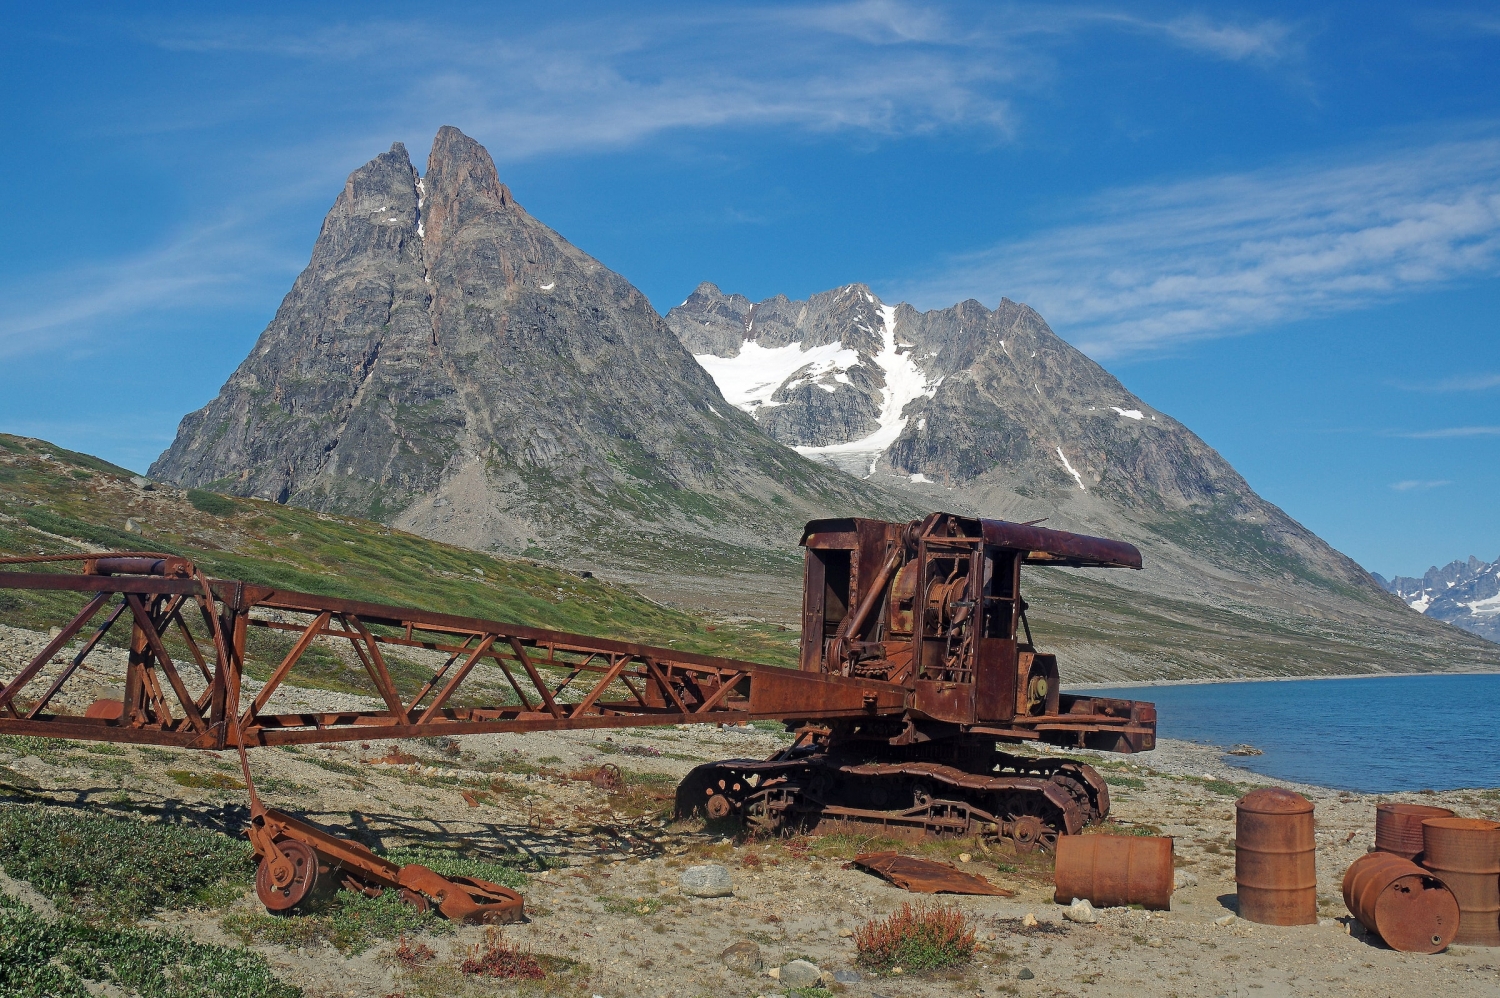 Rusted vehicle at remains of American WW2 base Bluie East Two at Ikateq, East Greenland. Photo by Reinhard Pantke - Visit Greenland